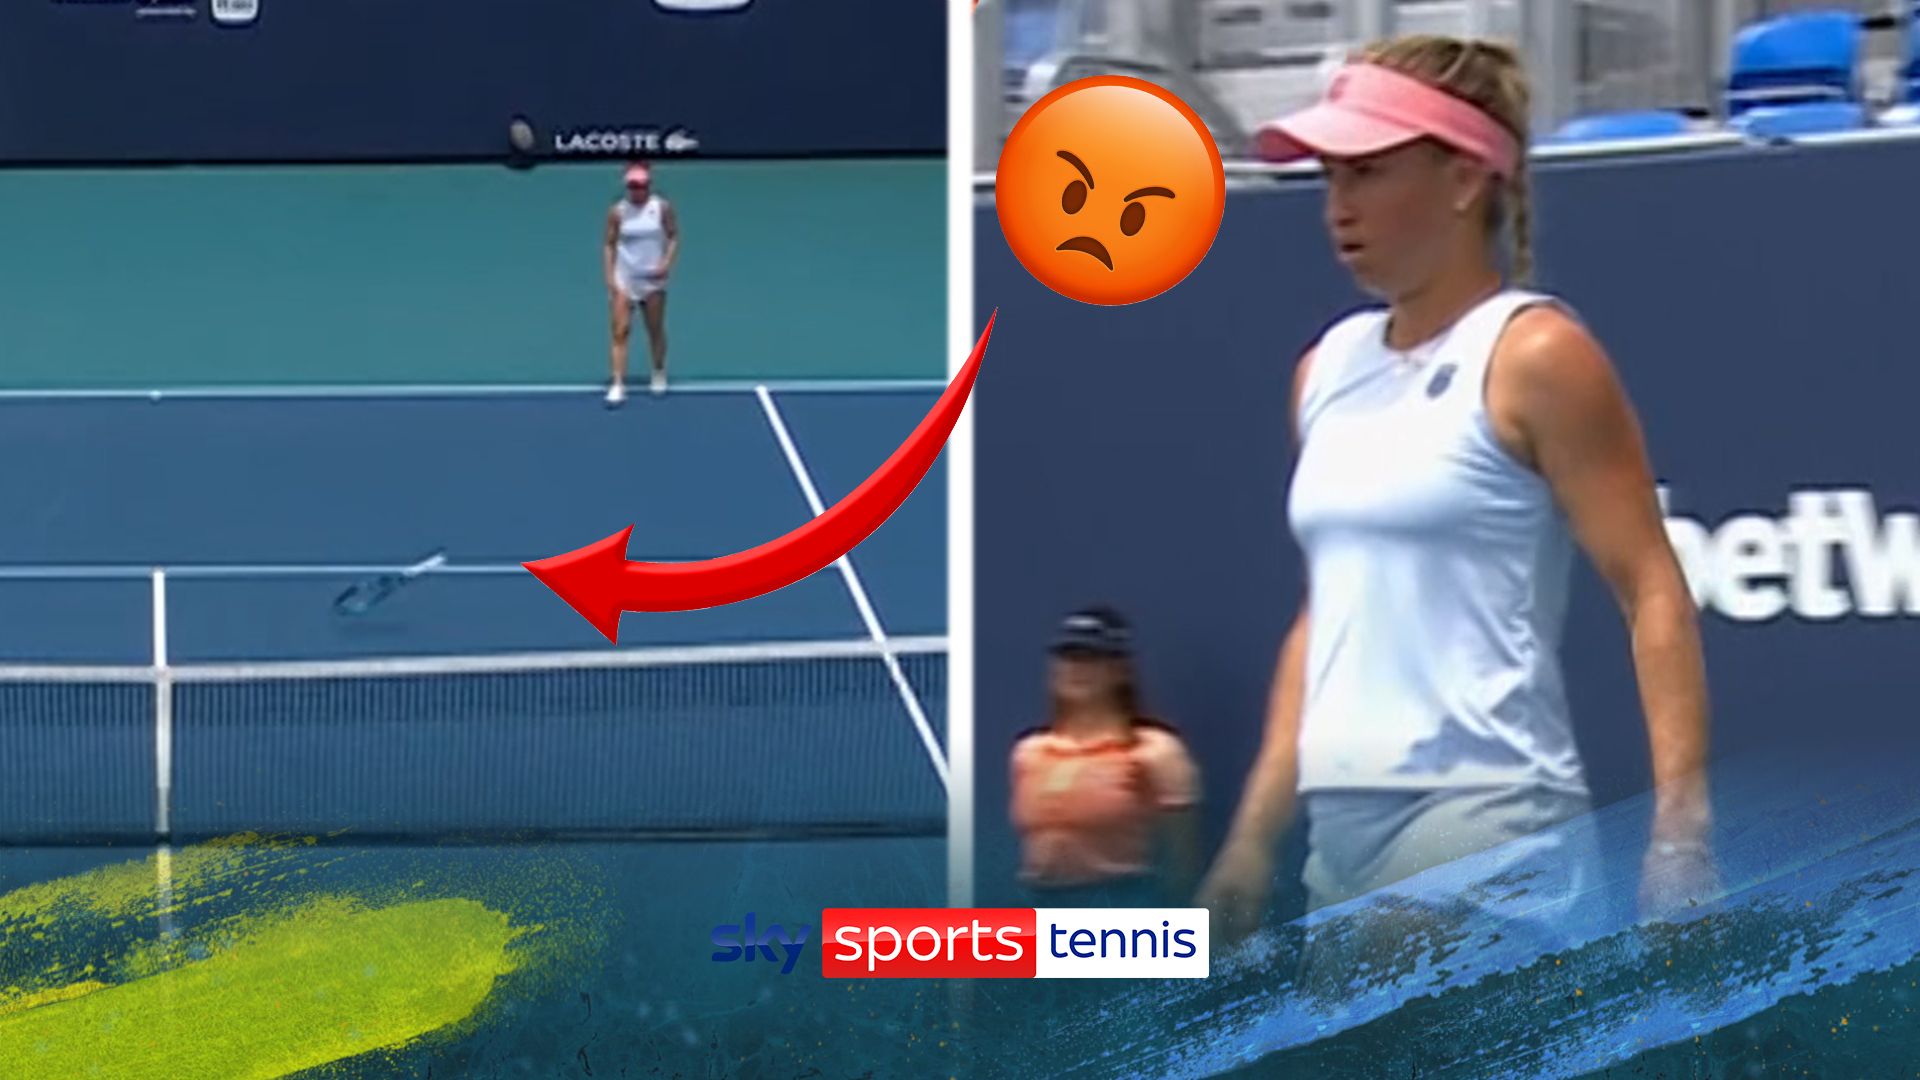 'Oh my golly!' | Putintseva throws racket across court as she loses point